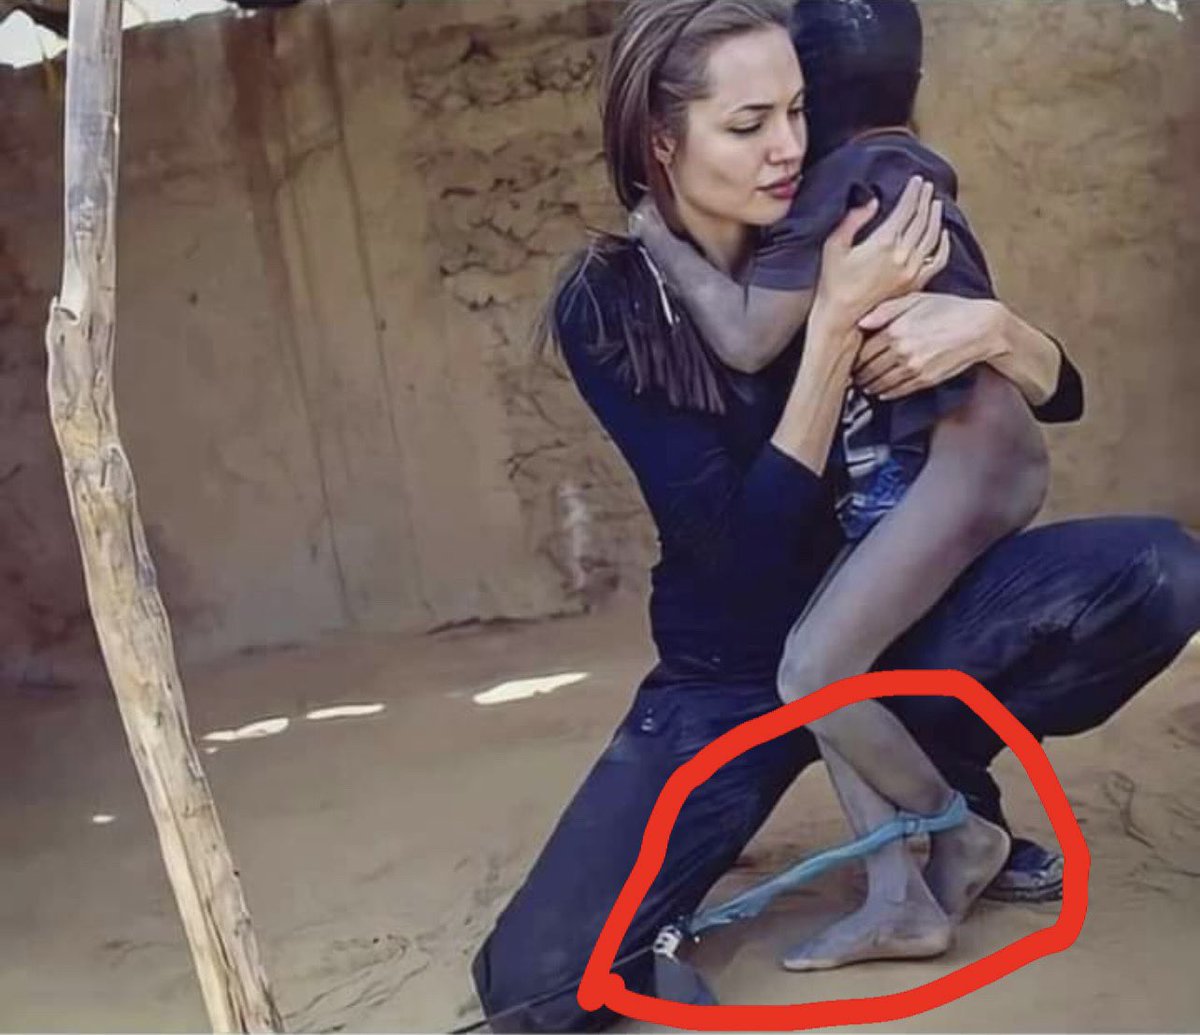 Angelina Jolie is a perfect example of what they show us versus what is really going on.